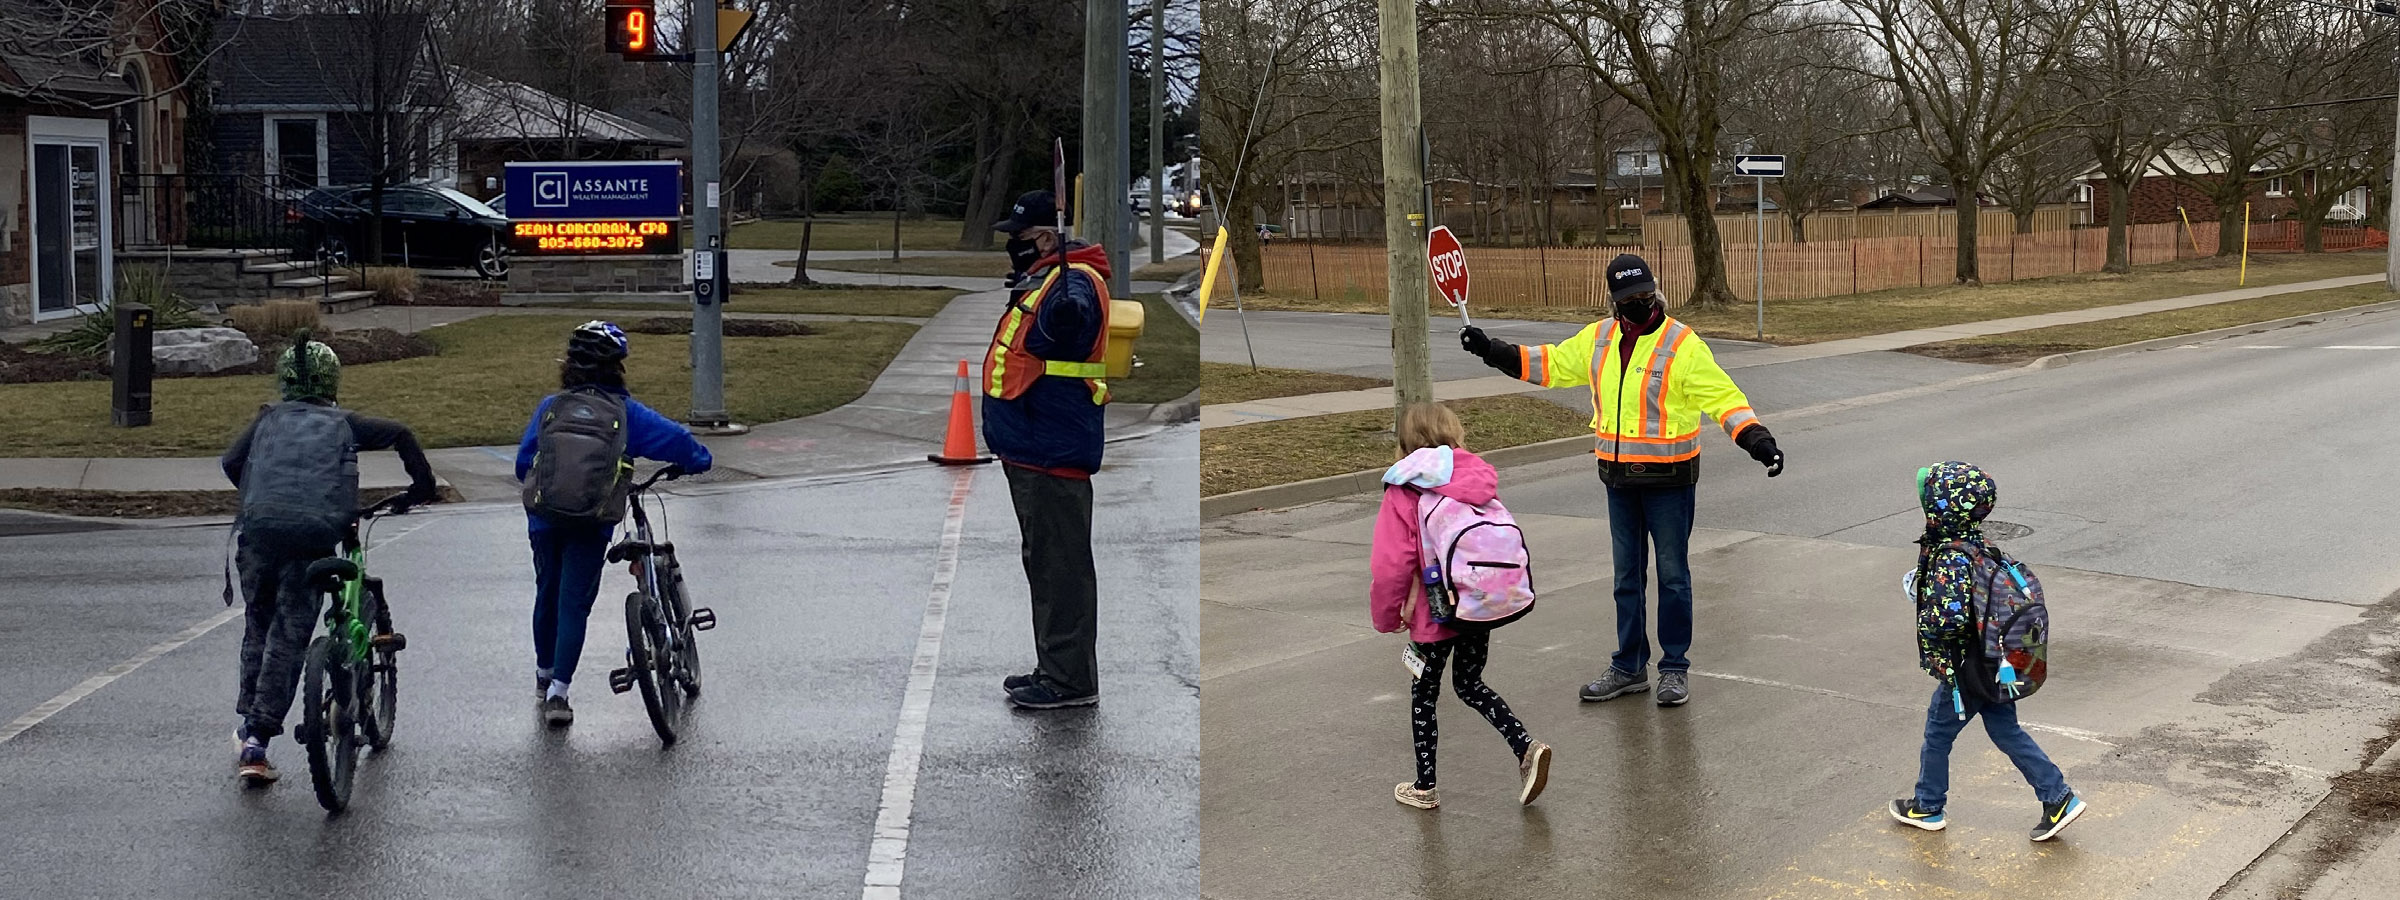 A special thank you to Pelham crossing guards on Crossing Guard Appreciation day